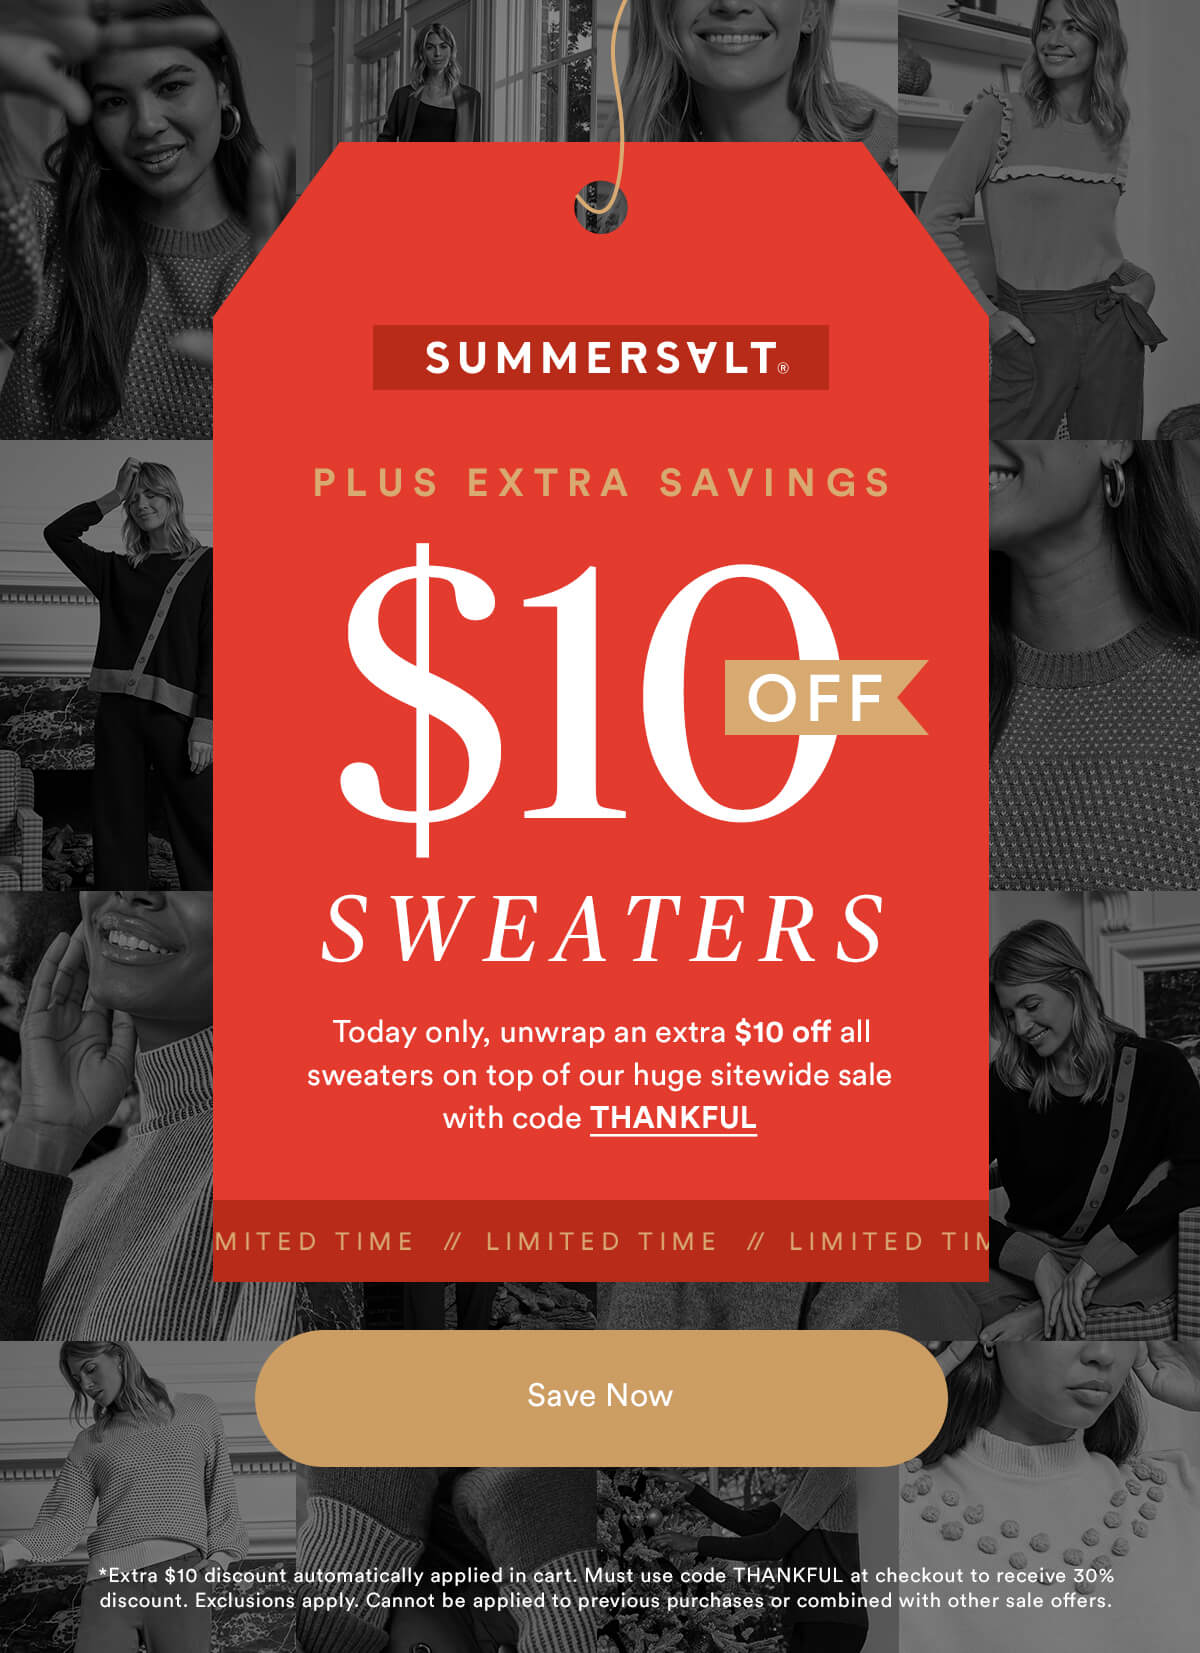 Red gift tag over black and white images featuring Extra Savings! $10 off sweaters today only.